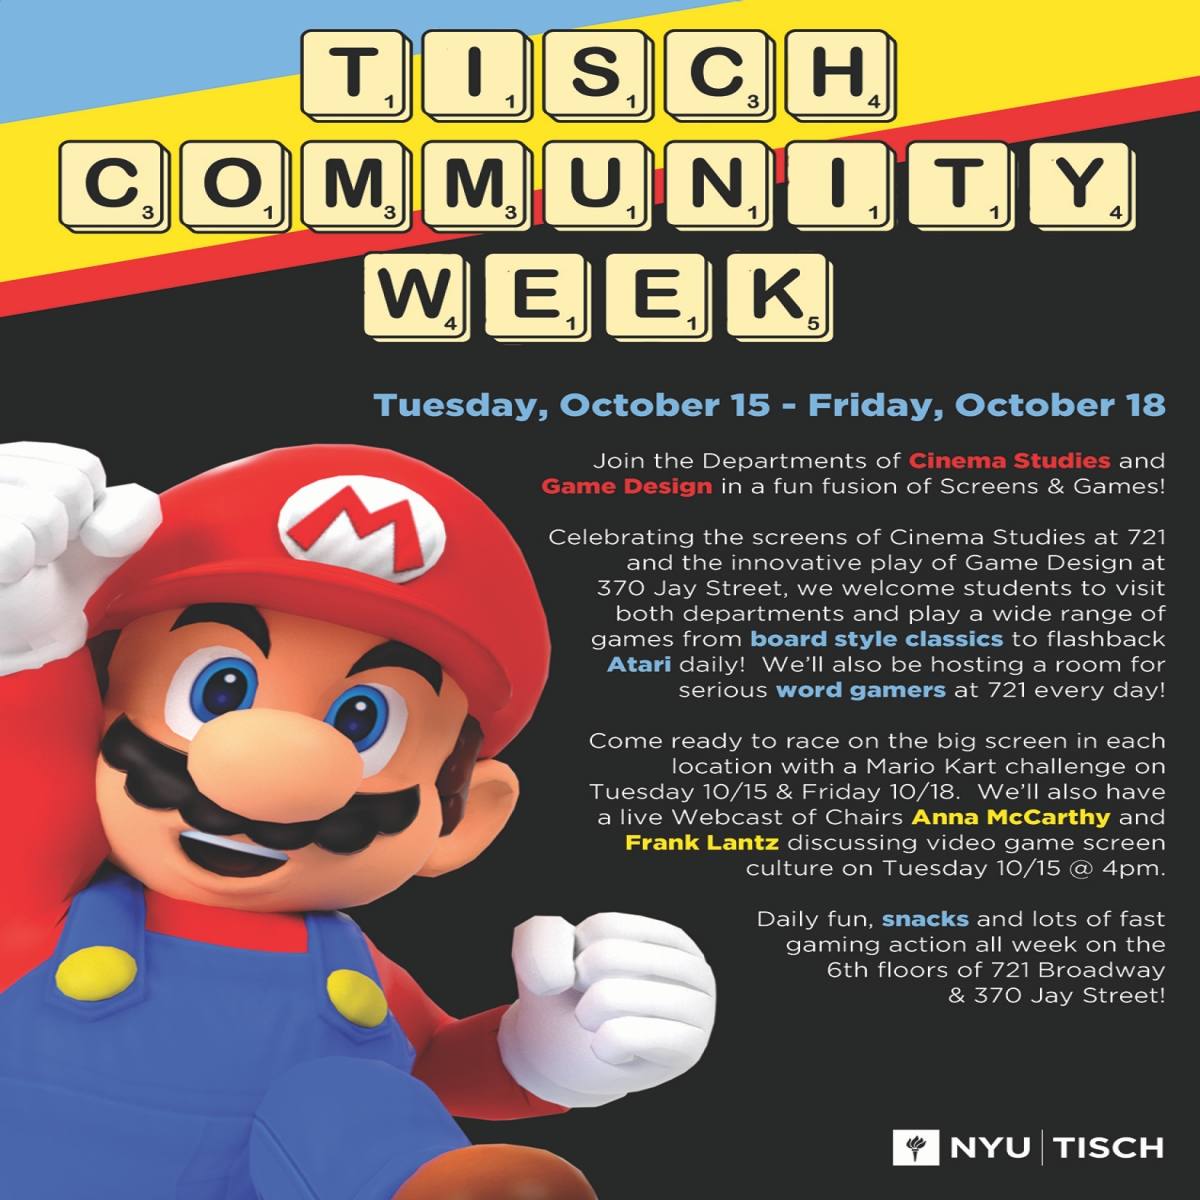 Video game character Mario with one fist celebrating in the air. Text reads: Tisch Community Week, Tuesday, October 15 through Friday, October 18